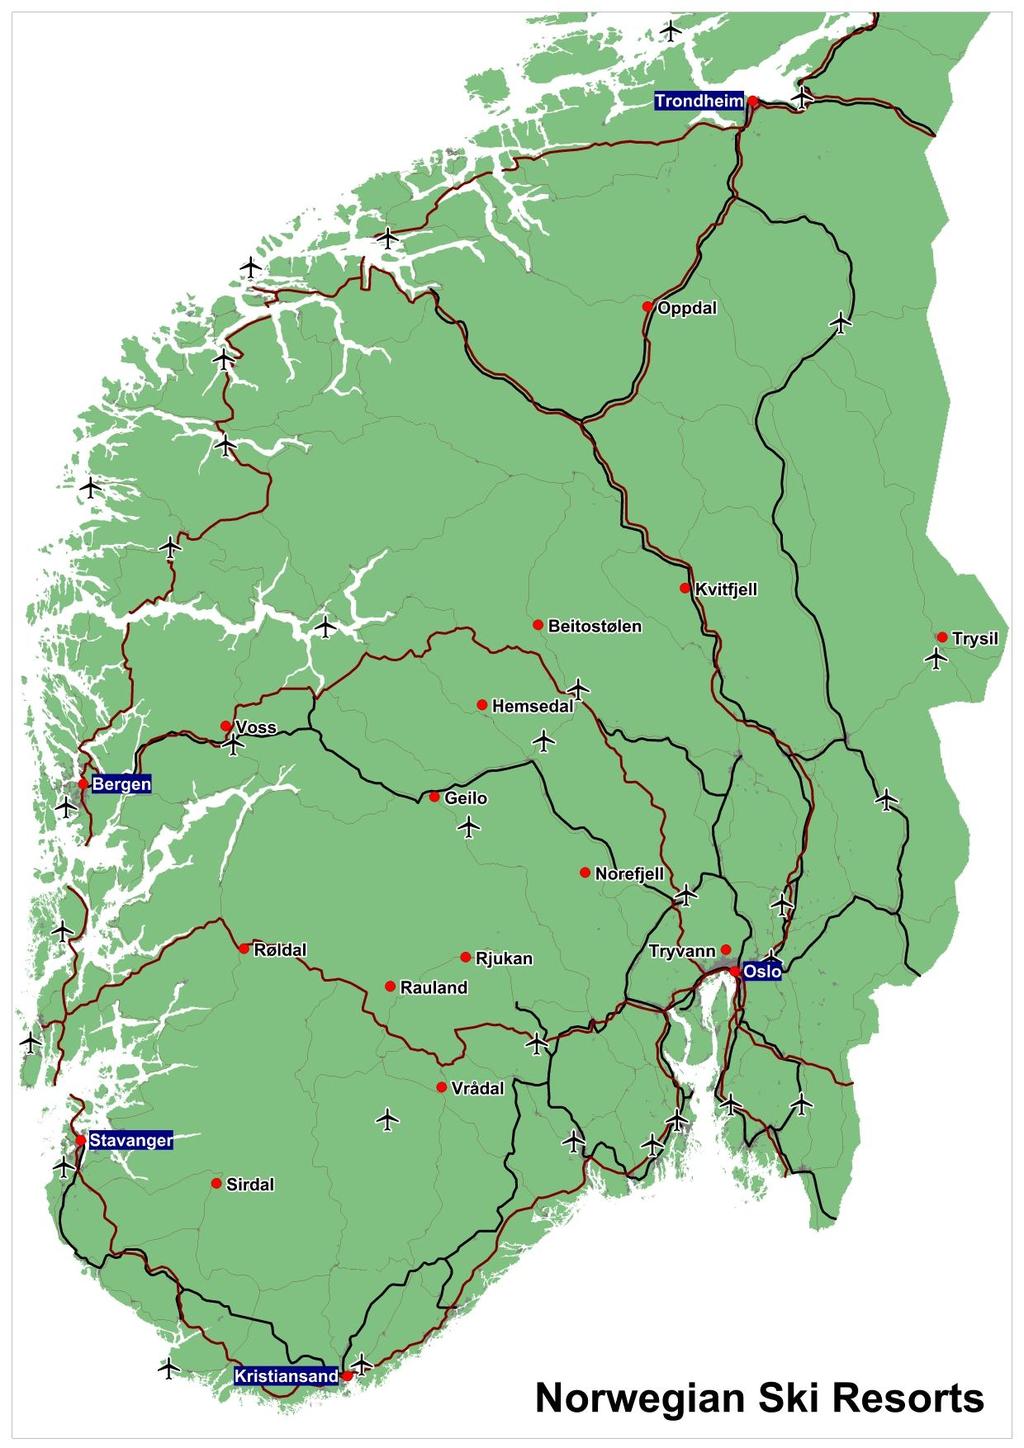 Contract 5, Subject 1: Demand Forecasting 34 Figure 2.14 displays the location of the prominent ski resorts in Norway, as well as the connecting transport networks.